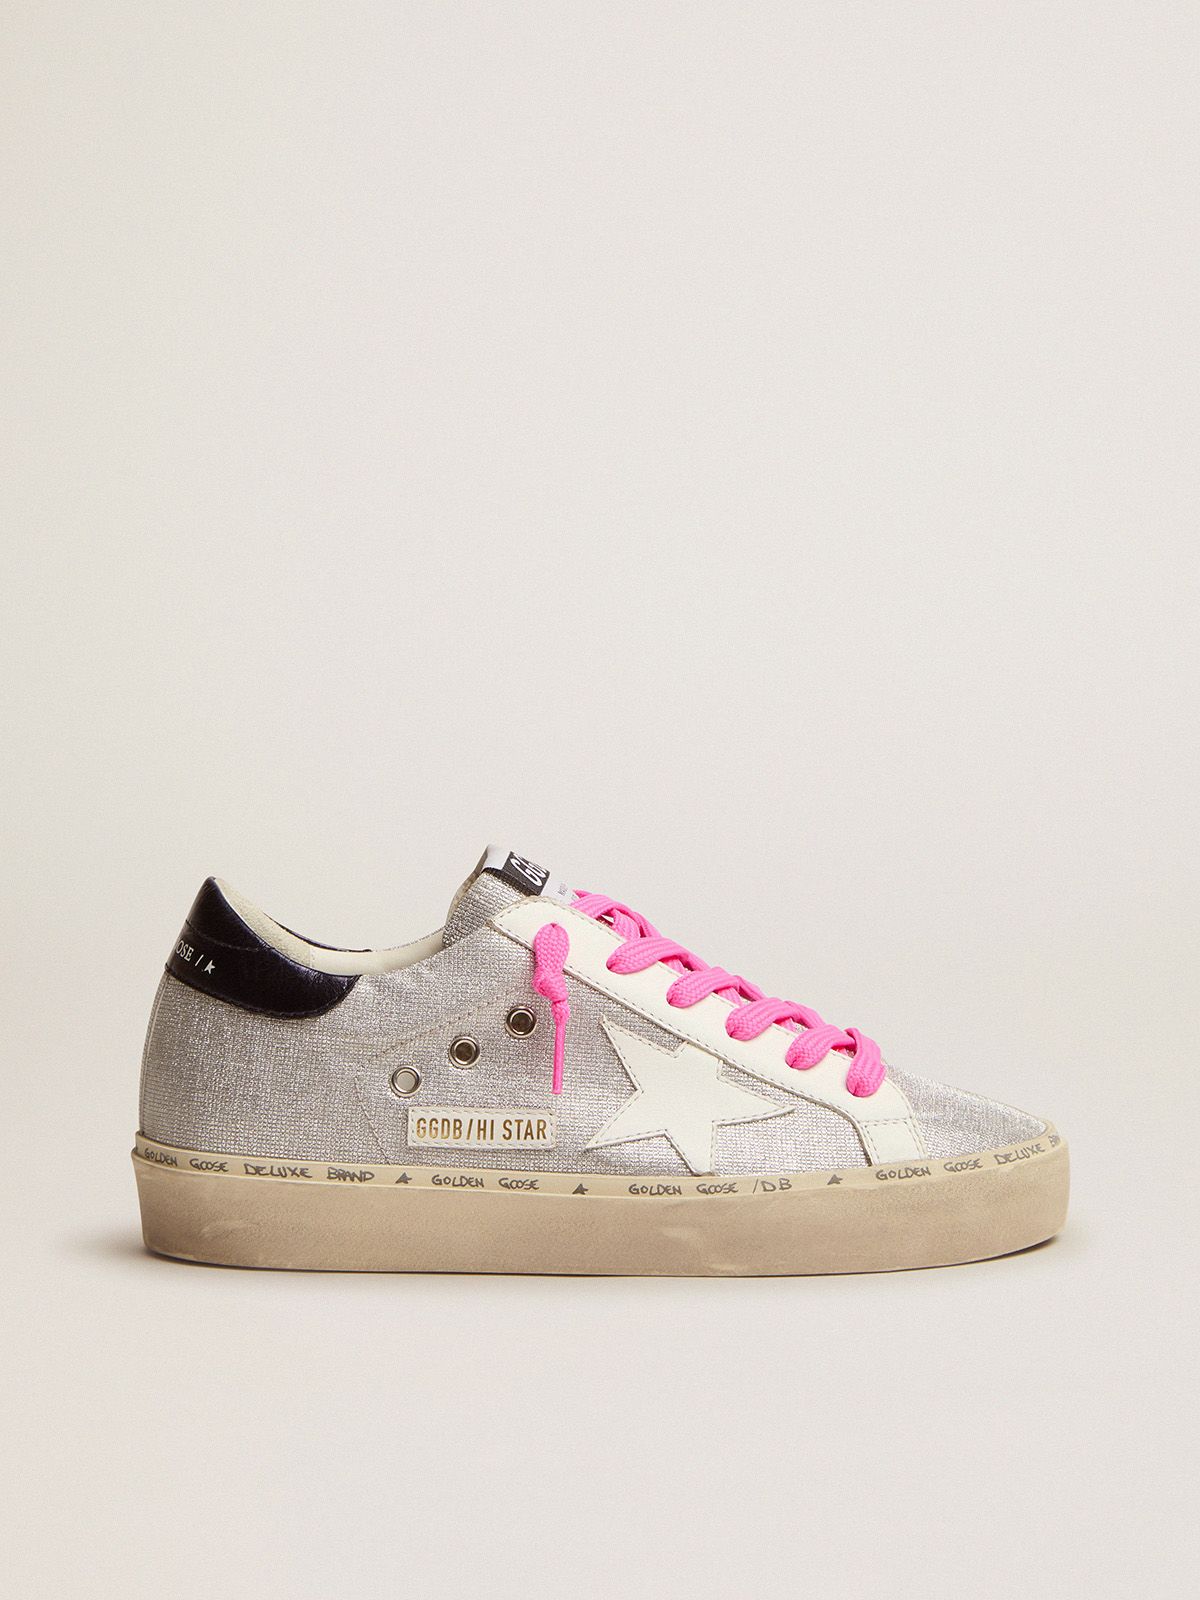 Sneakers Golden Goose Uomo Hi Star sneakers in silver glitter with checkered pattern and white leather star